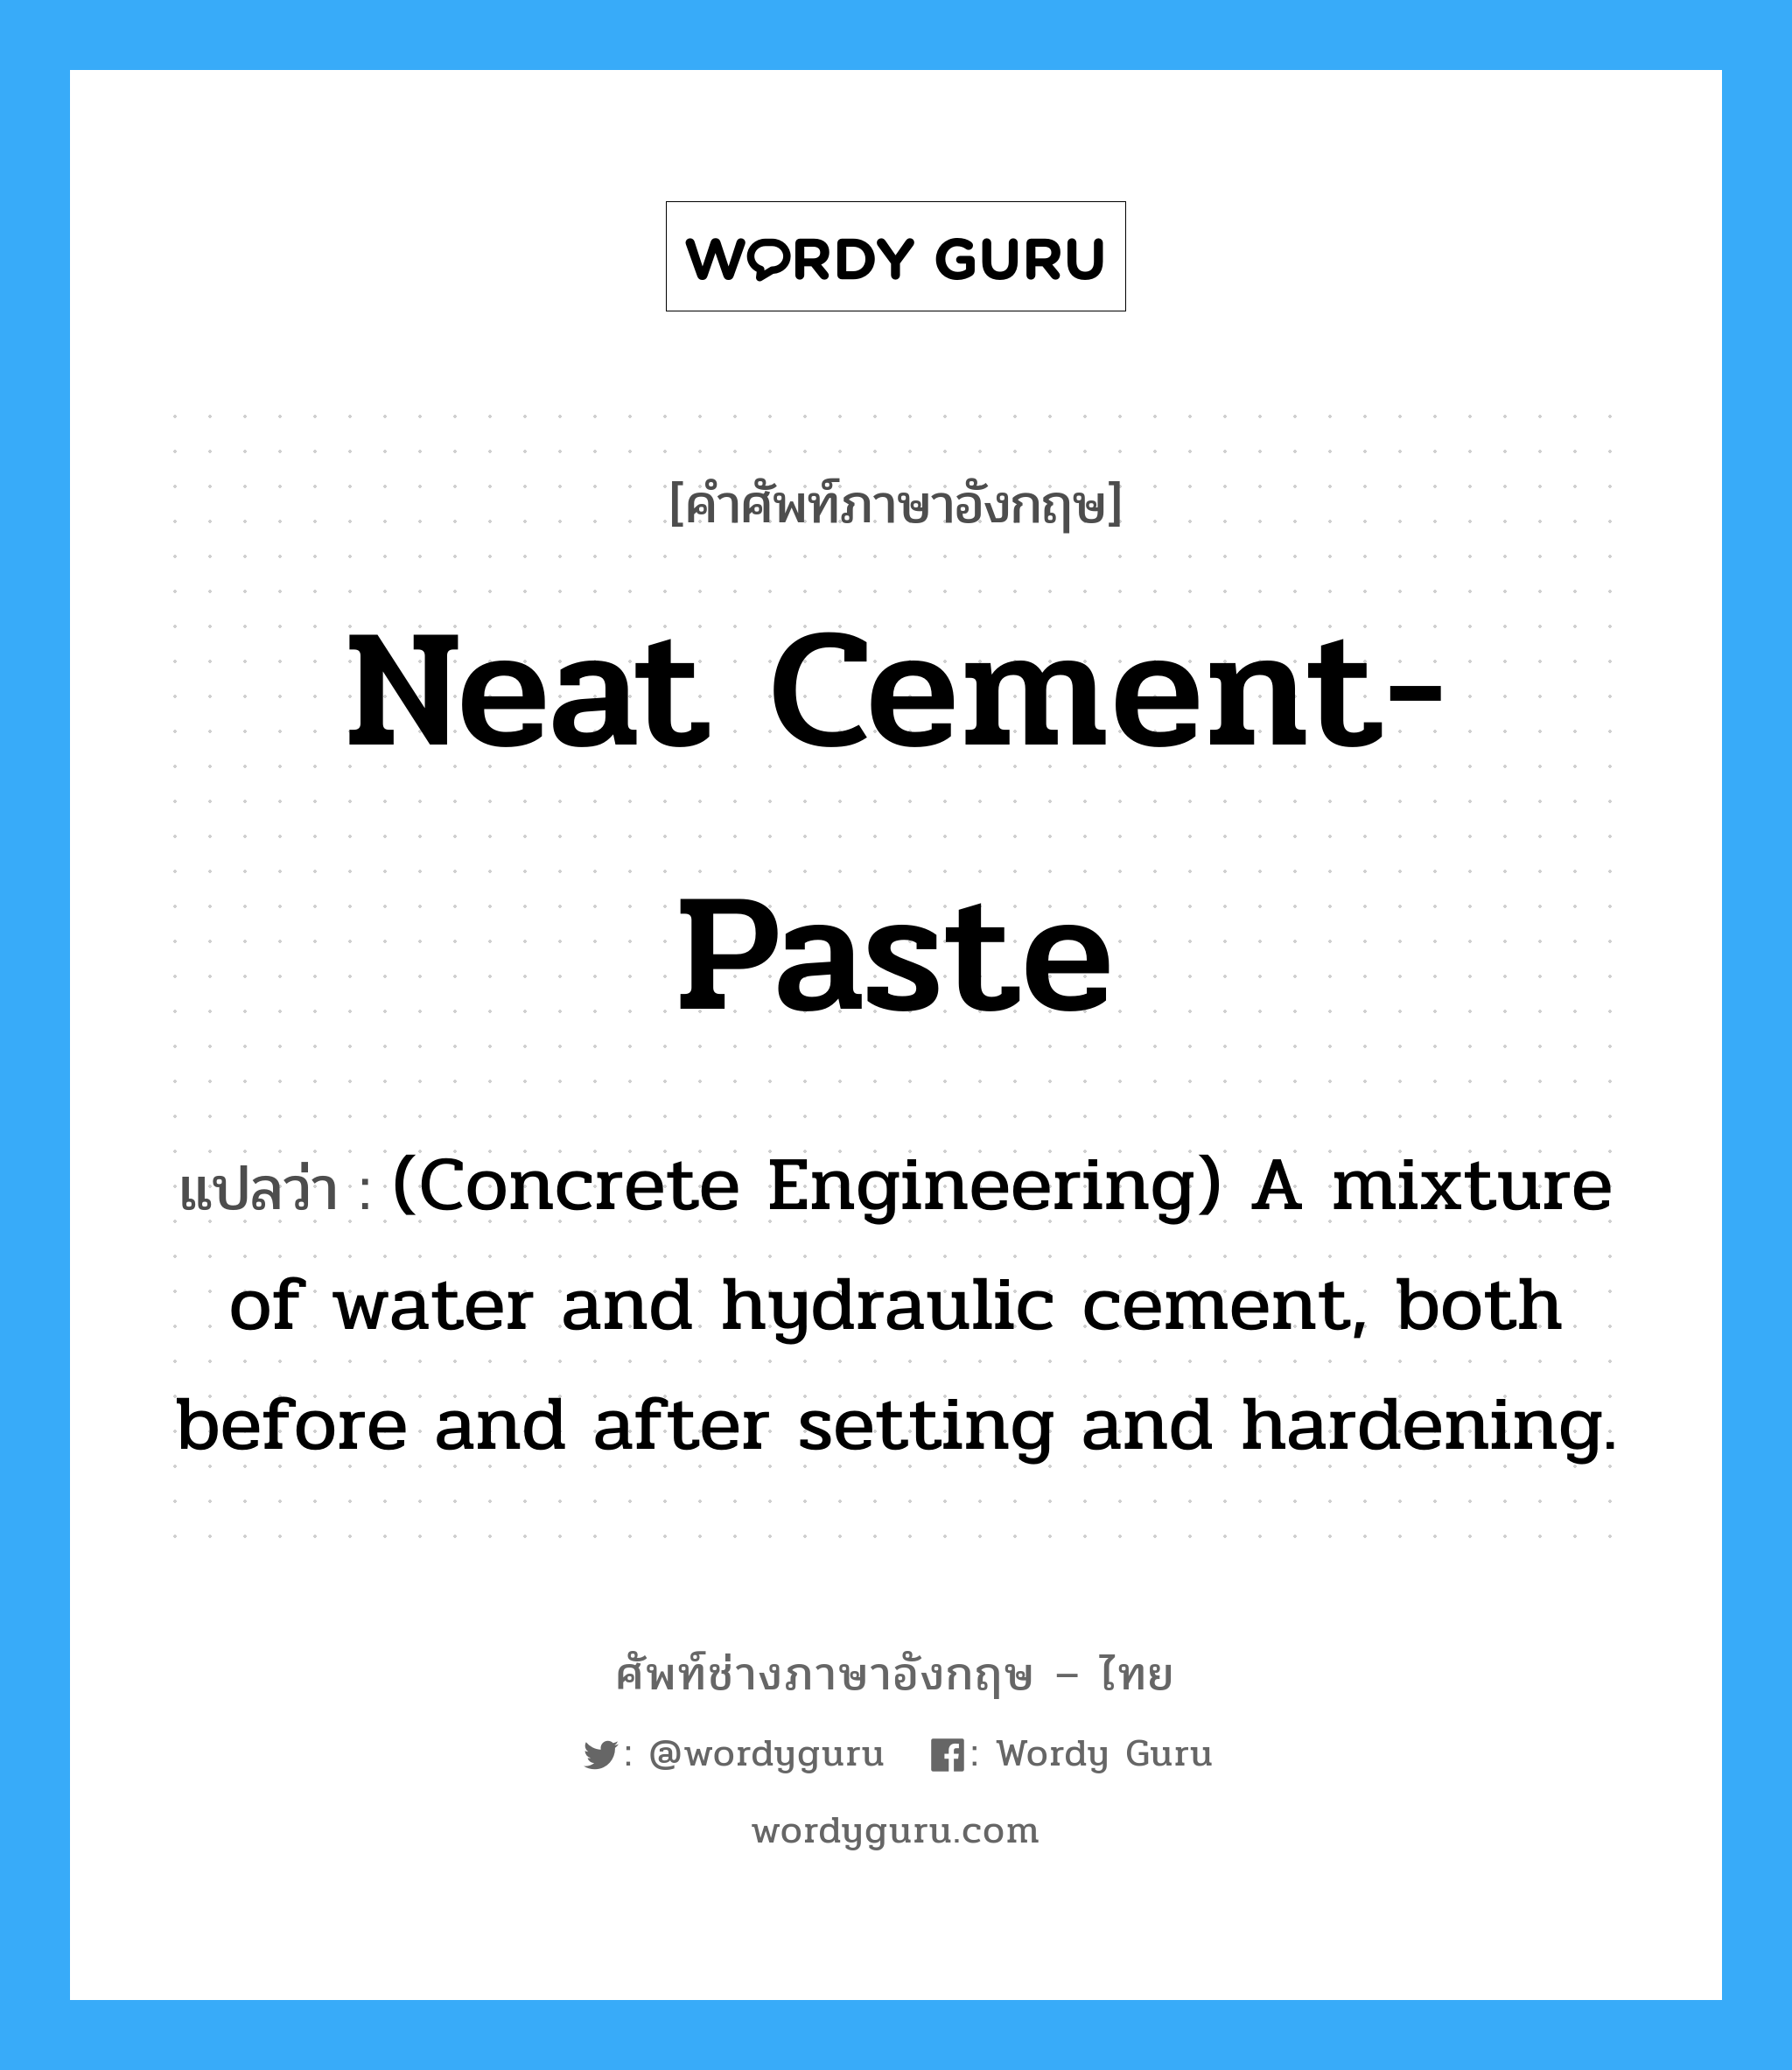 Neat Cement-Paste แปลว่า?, คำศัพท์ช่างภาษาอังกฤษ - ไทย Neat Cement-Paste คำศัพท์ภาษาอังกฤษ Neat Cement-Paste แปลว่า (Concrete Engineering) A mixture of water and hydraulic cement, both before and after setting and hardening.